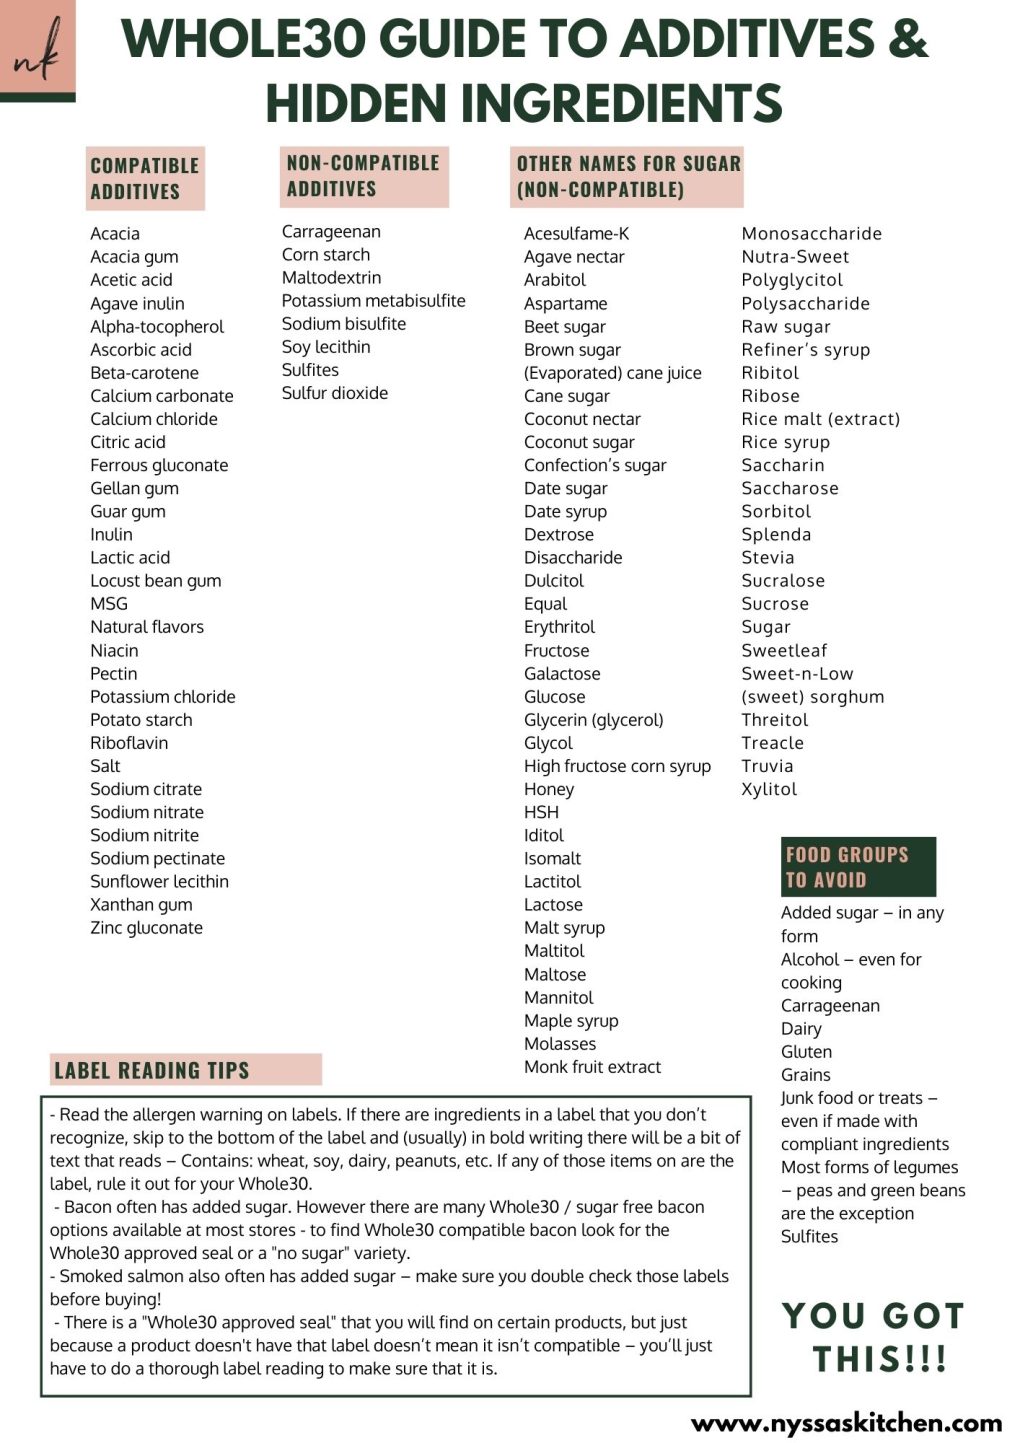 Whole30 Whole Foods Grocery List